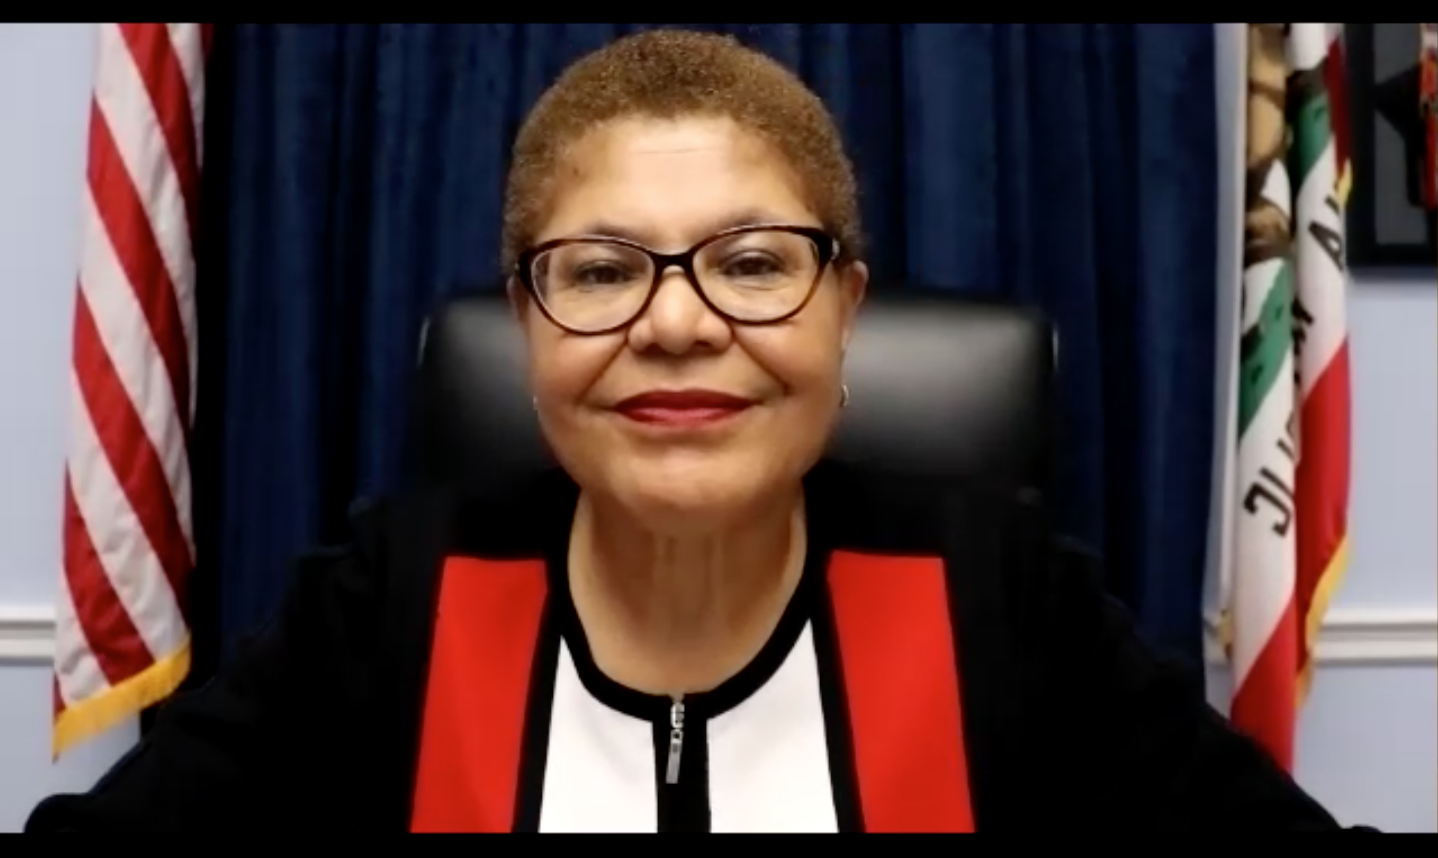 Stop pretending Karen Bass taking the mayor’s race lead changes anything